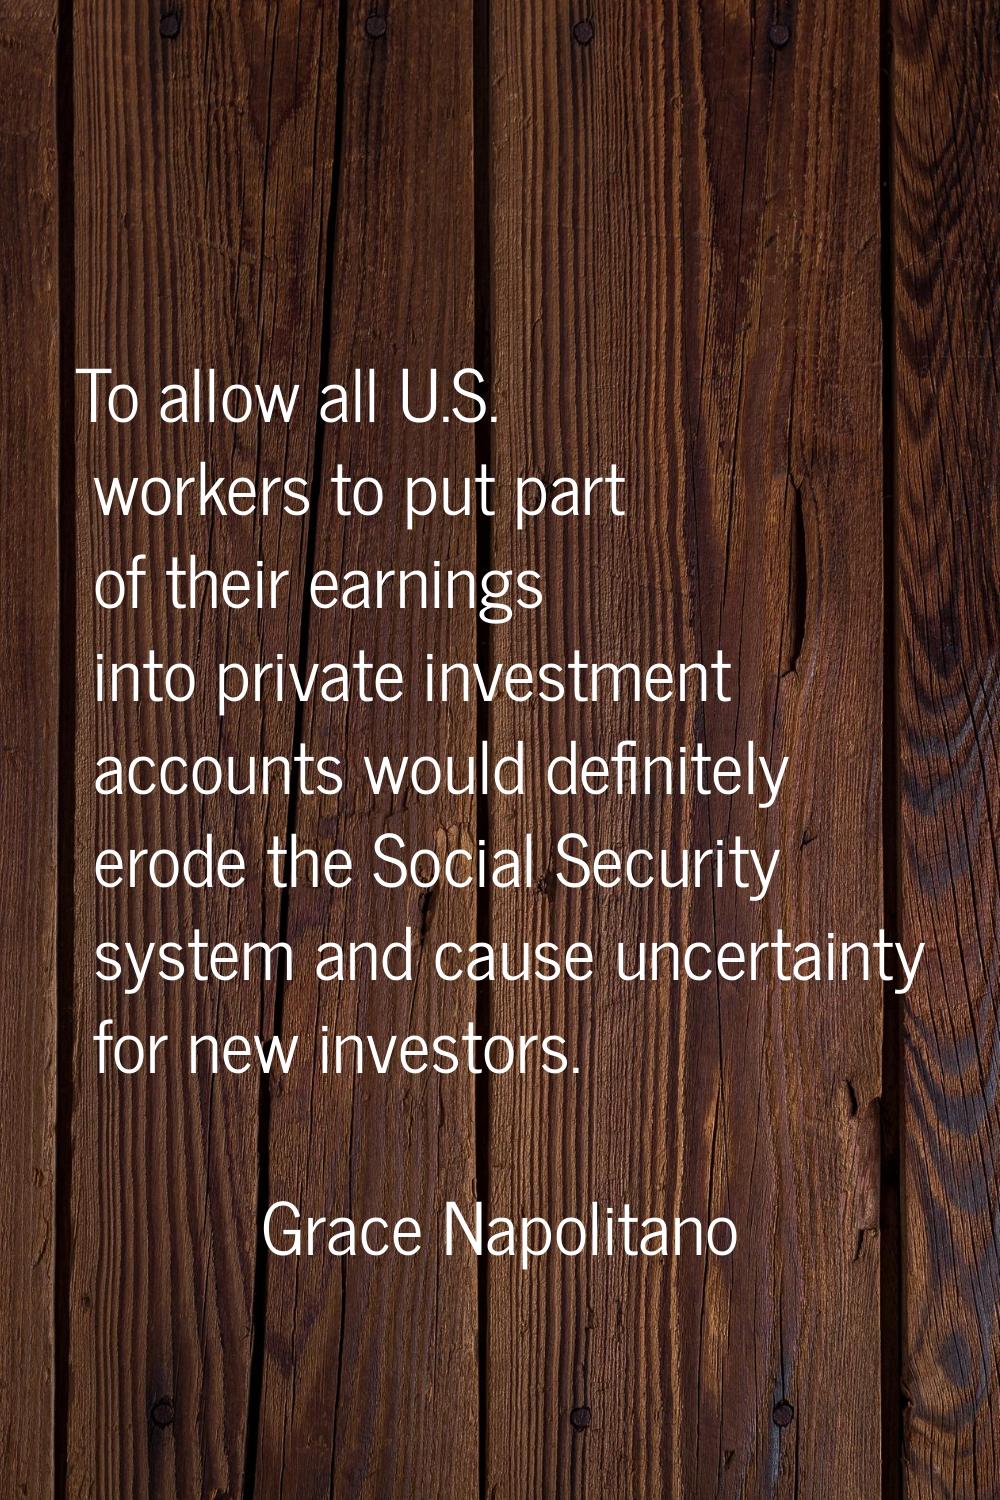 To allow all U.S. workers to put part of their earnings into private investment accounts would defi